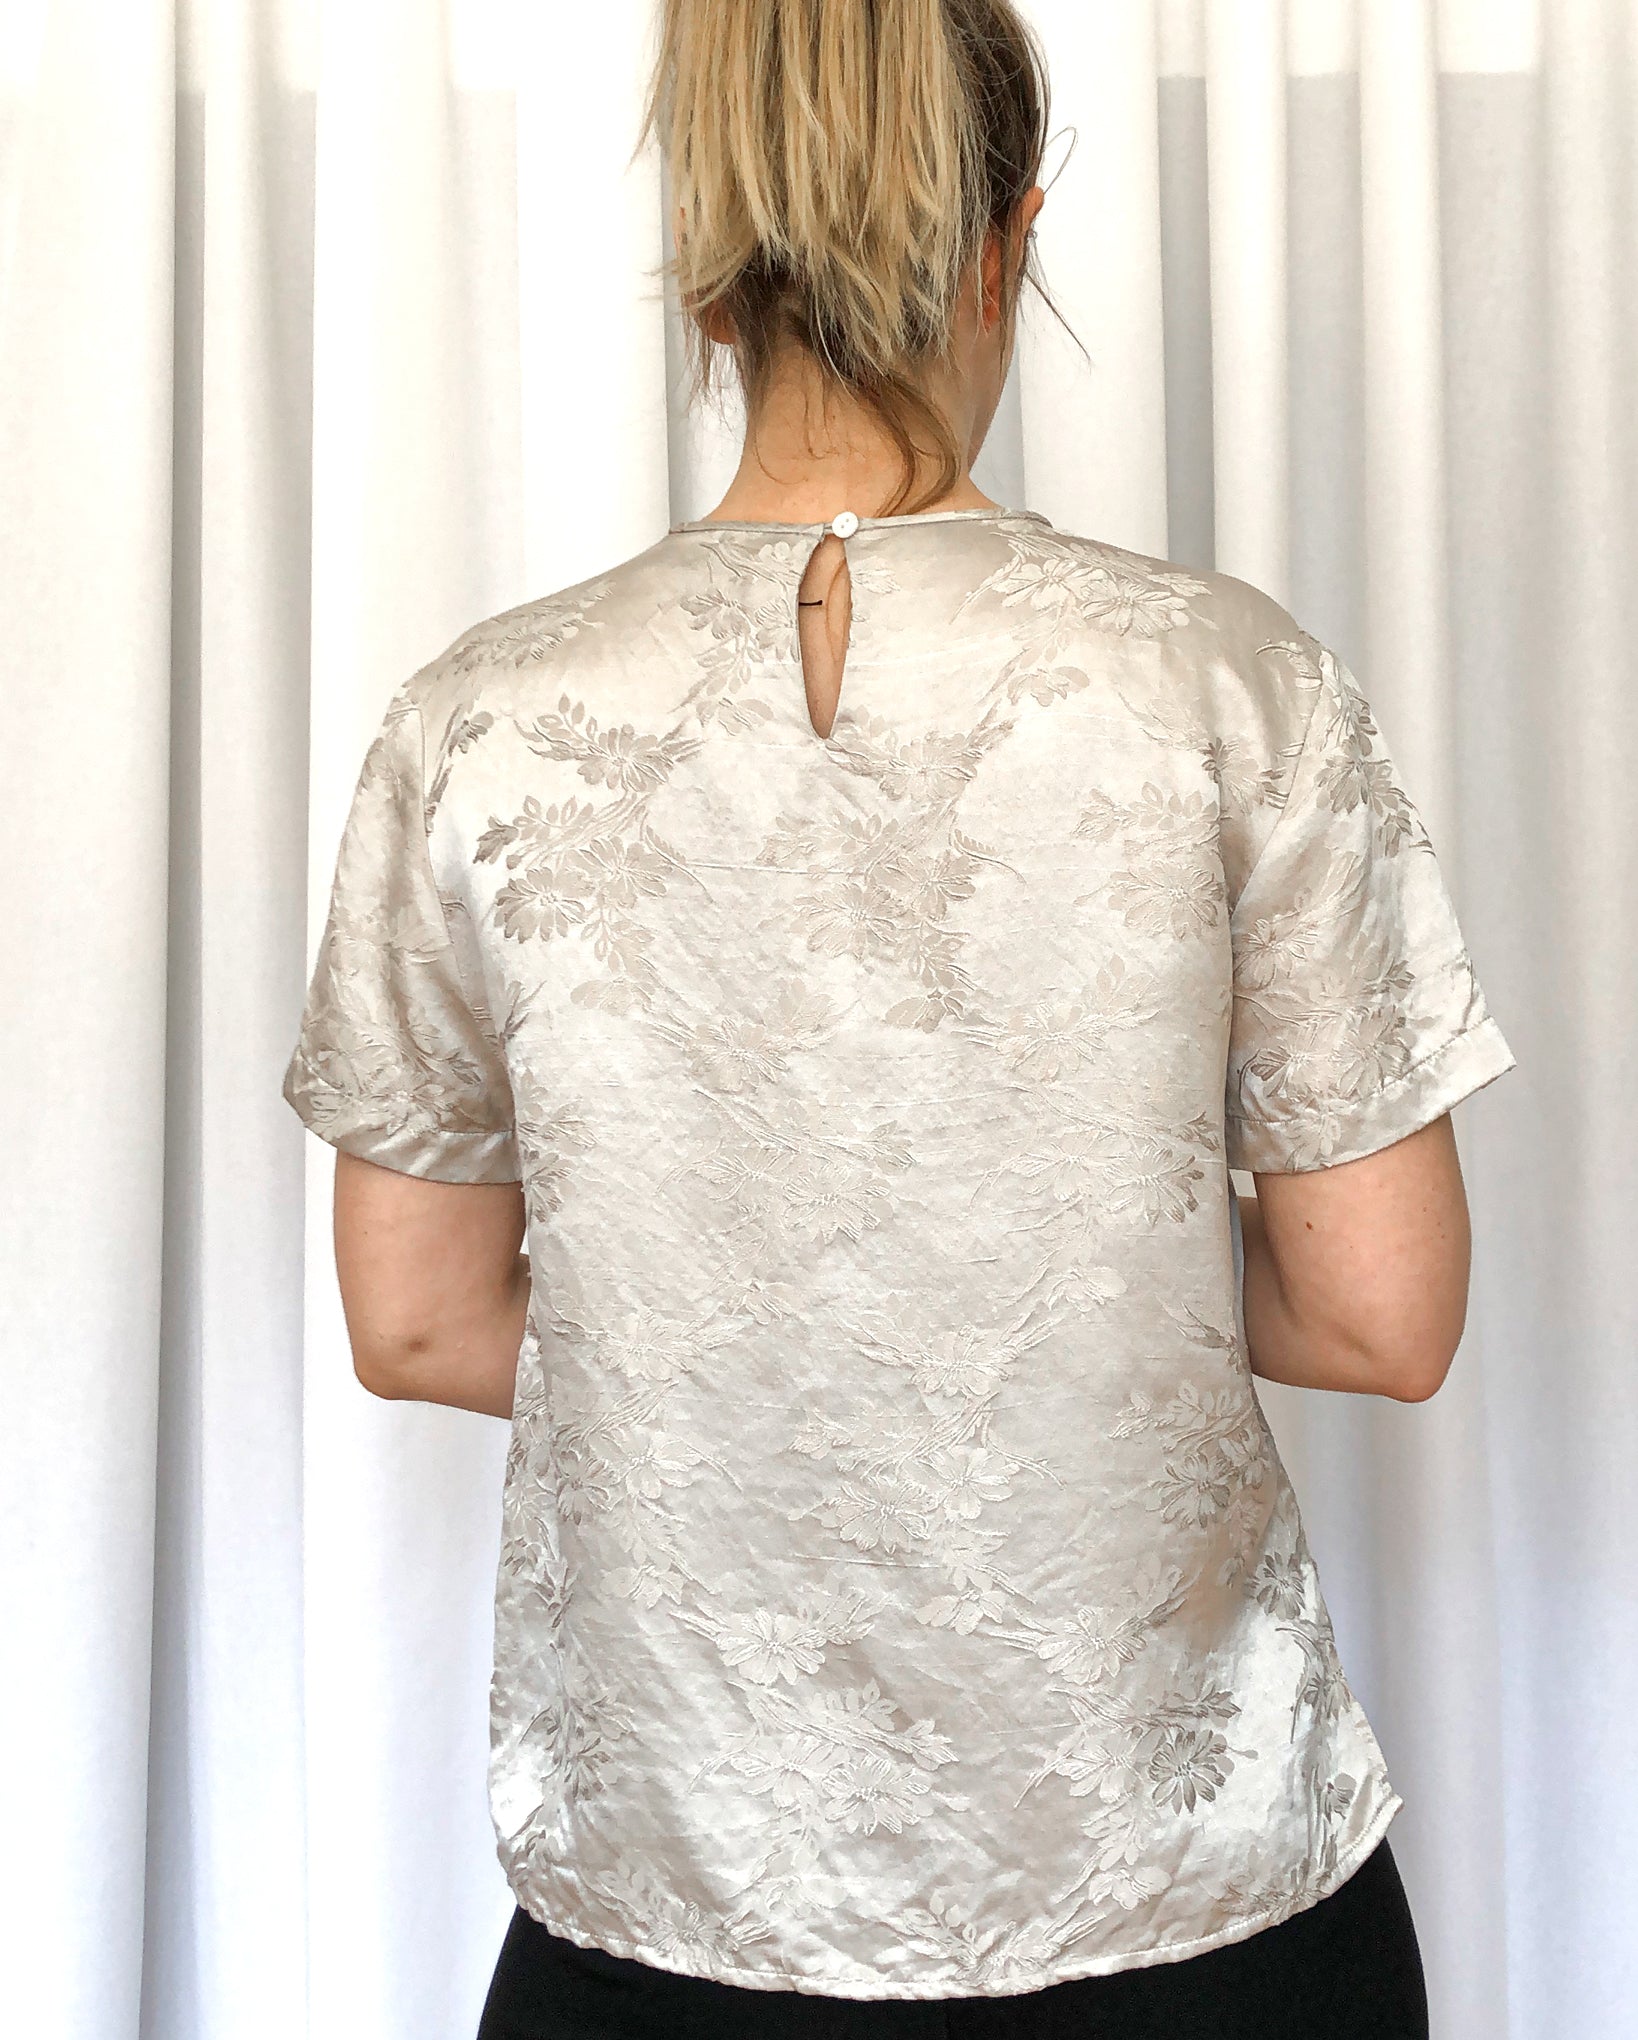 90s Silver Silk T Shirt With Jacquard Floral Details, Vintage 1990s Light Summer Blouse by Melanie Lynn, Shiny 90s Top Size Small